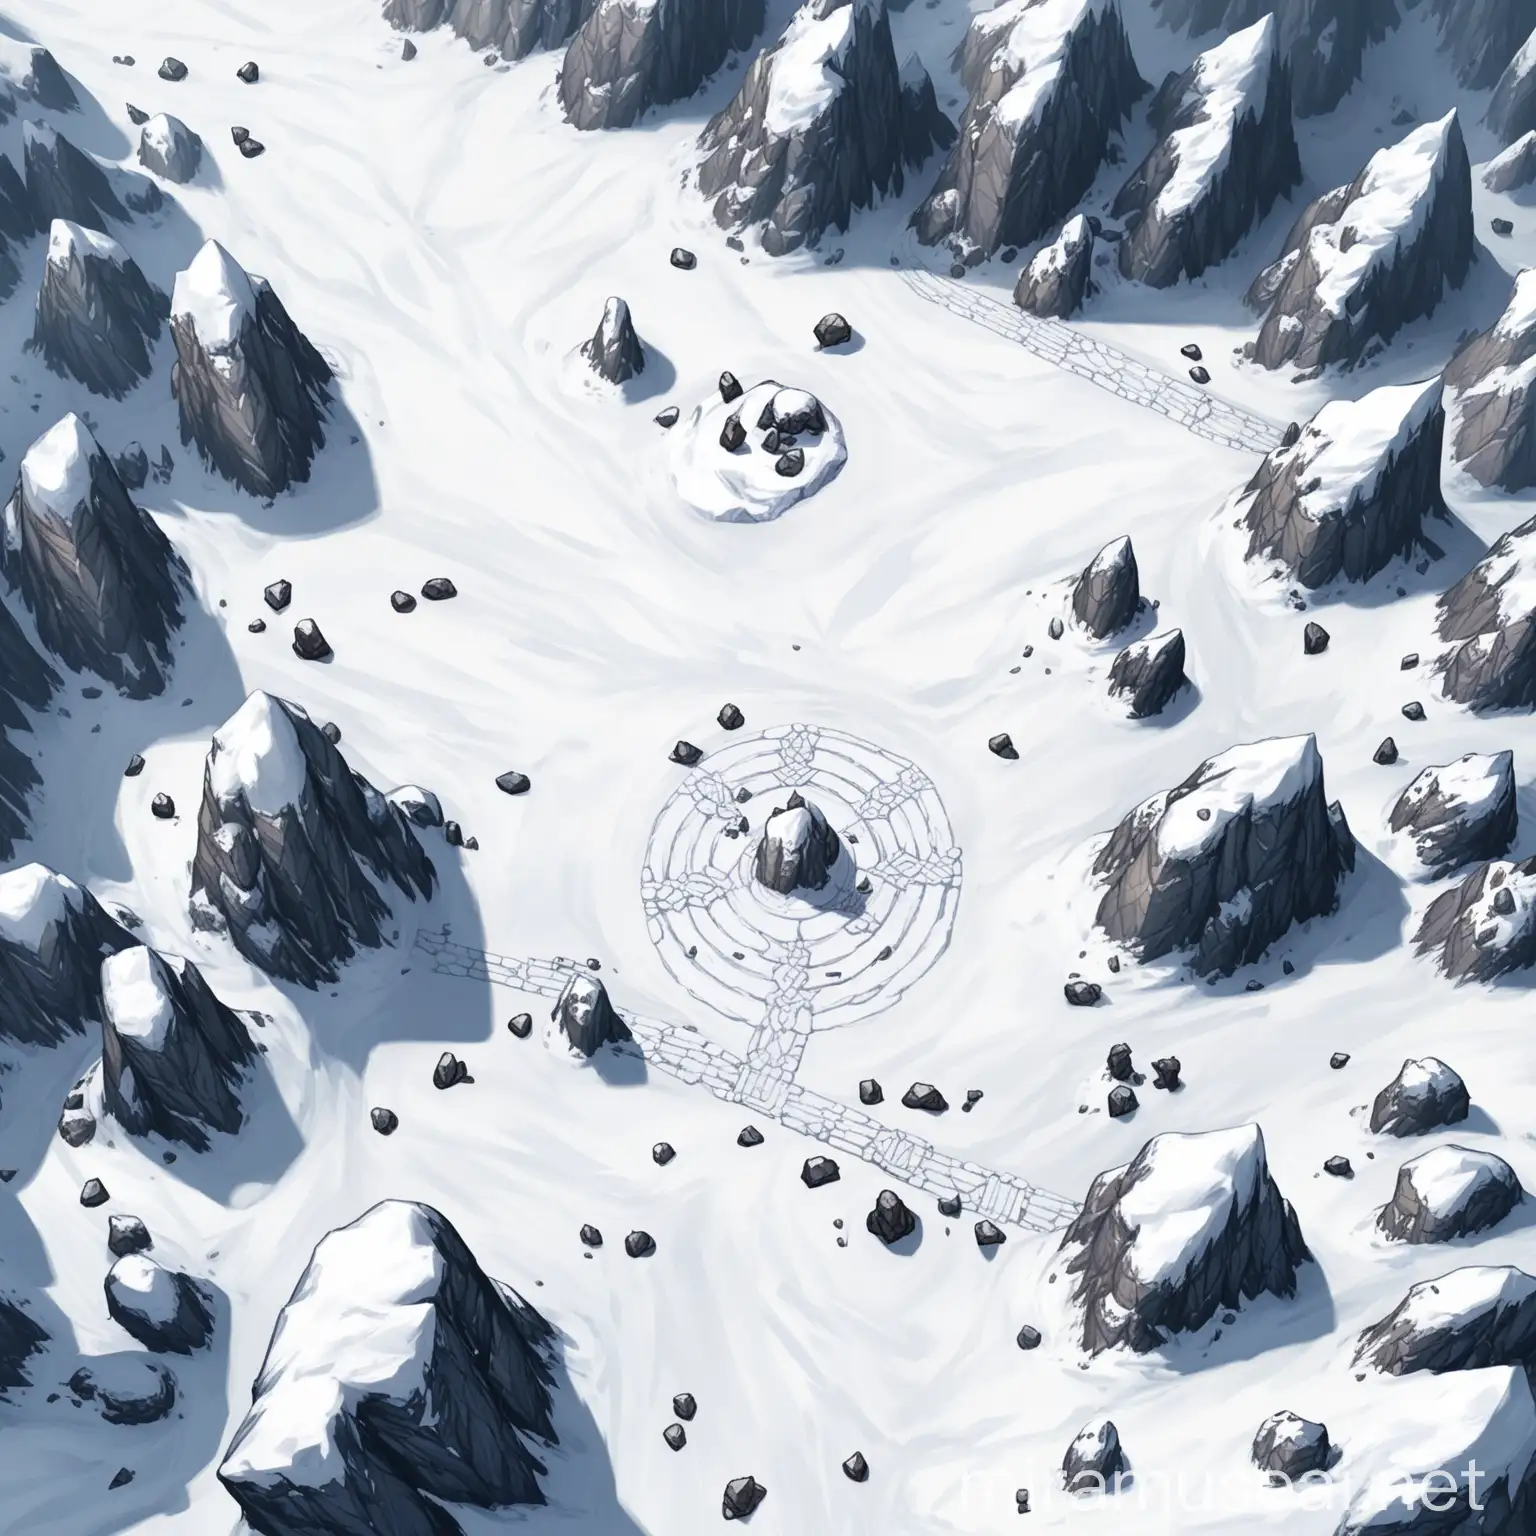 Top View Snow Mountain Path with Scattered Rocks DnD Encounter